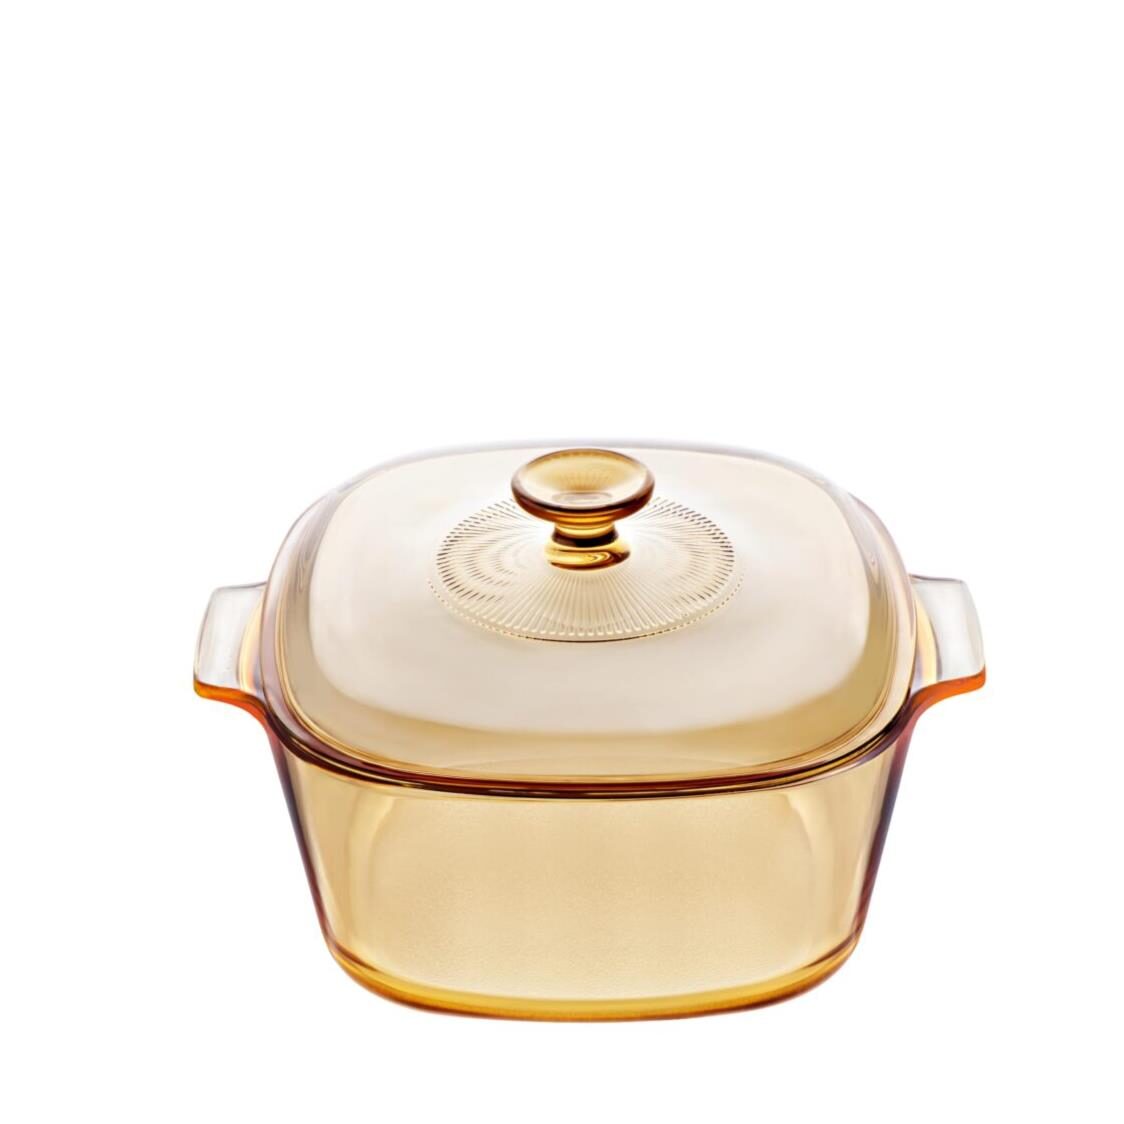 Vision Reverse 3L Covered Casserole Amber VSA-3CL1